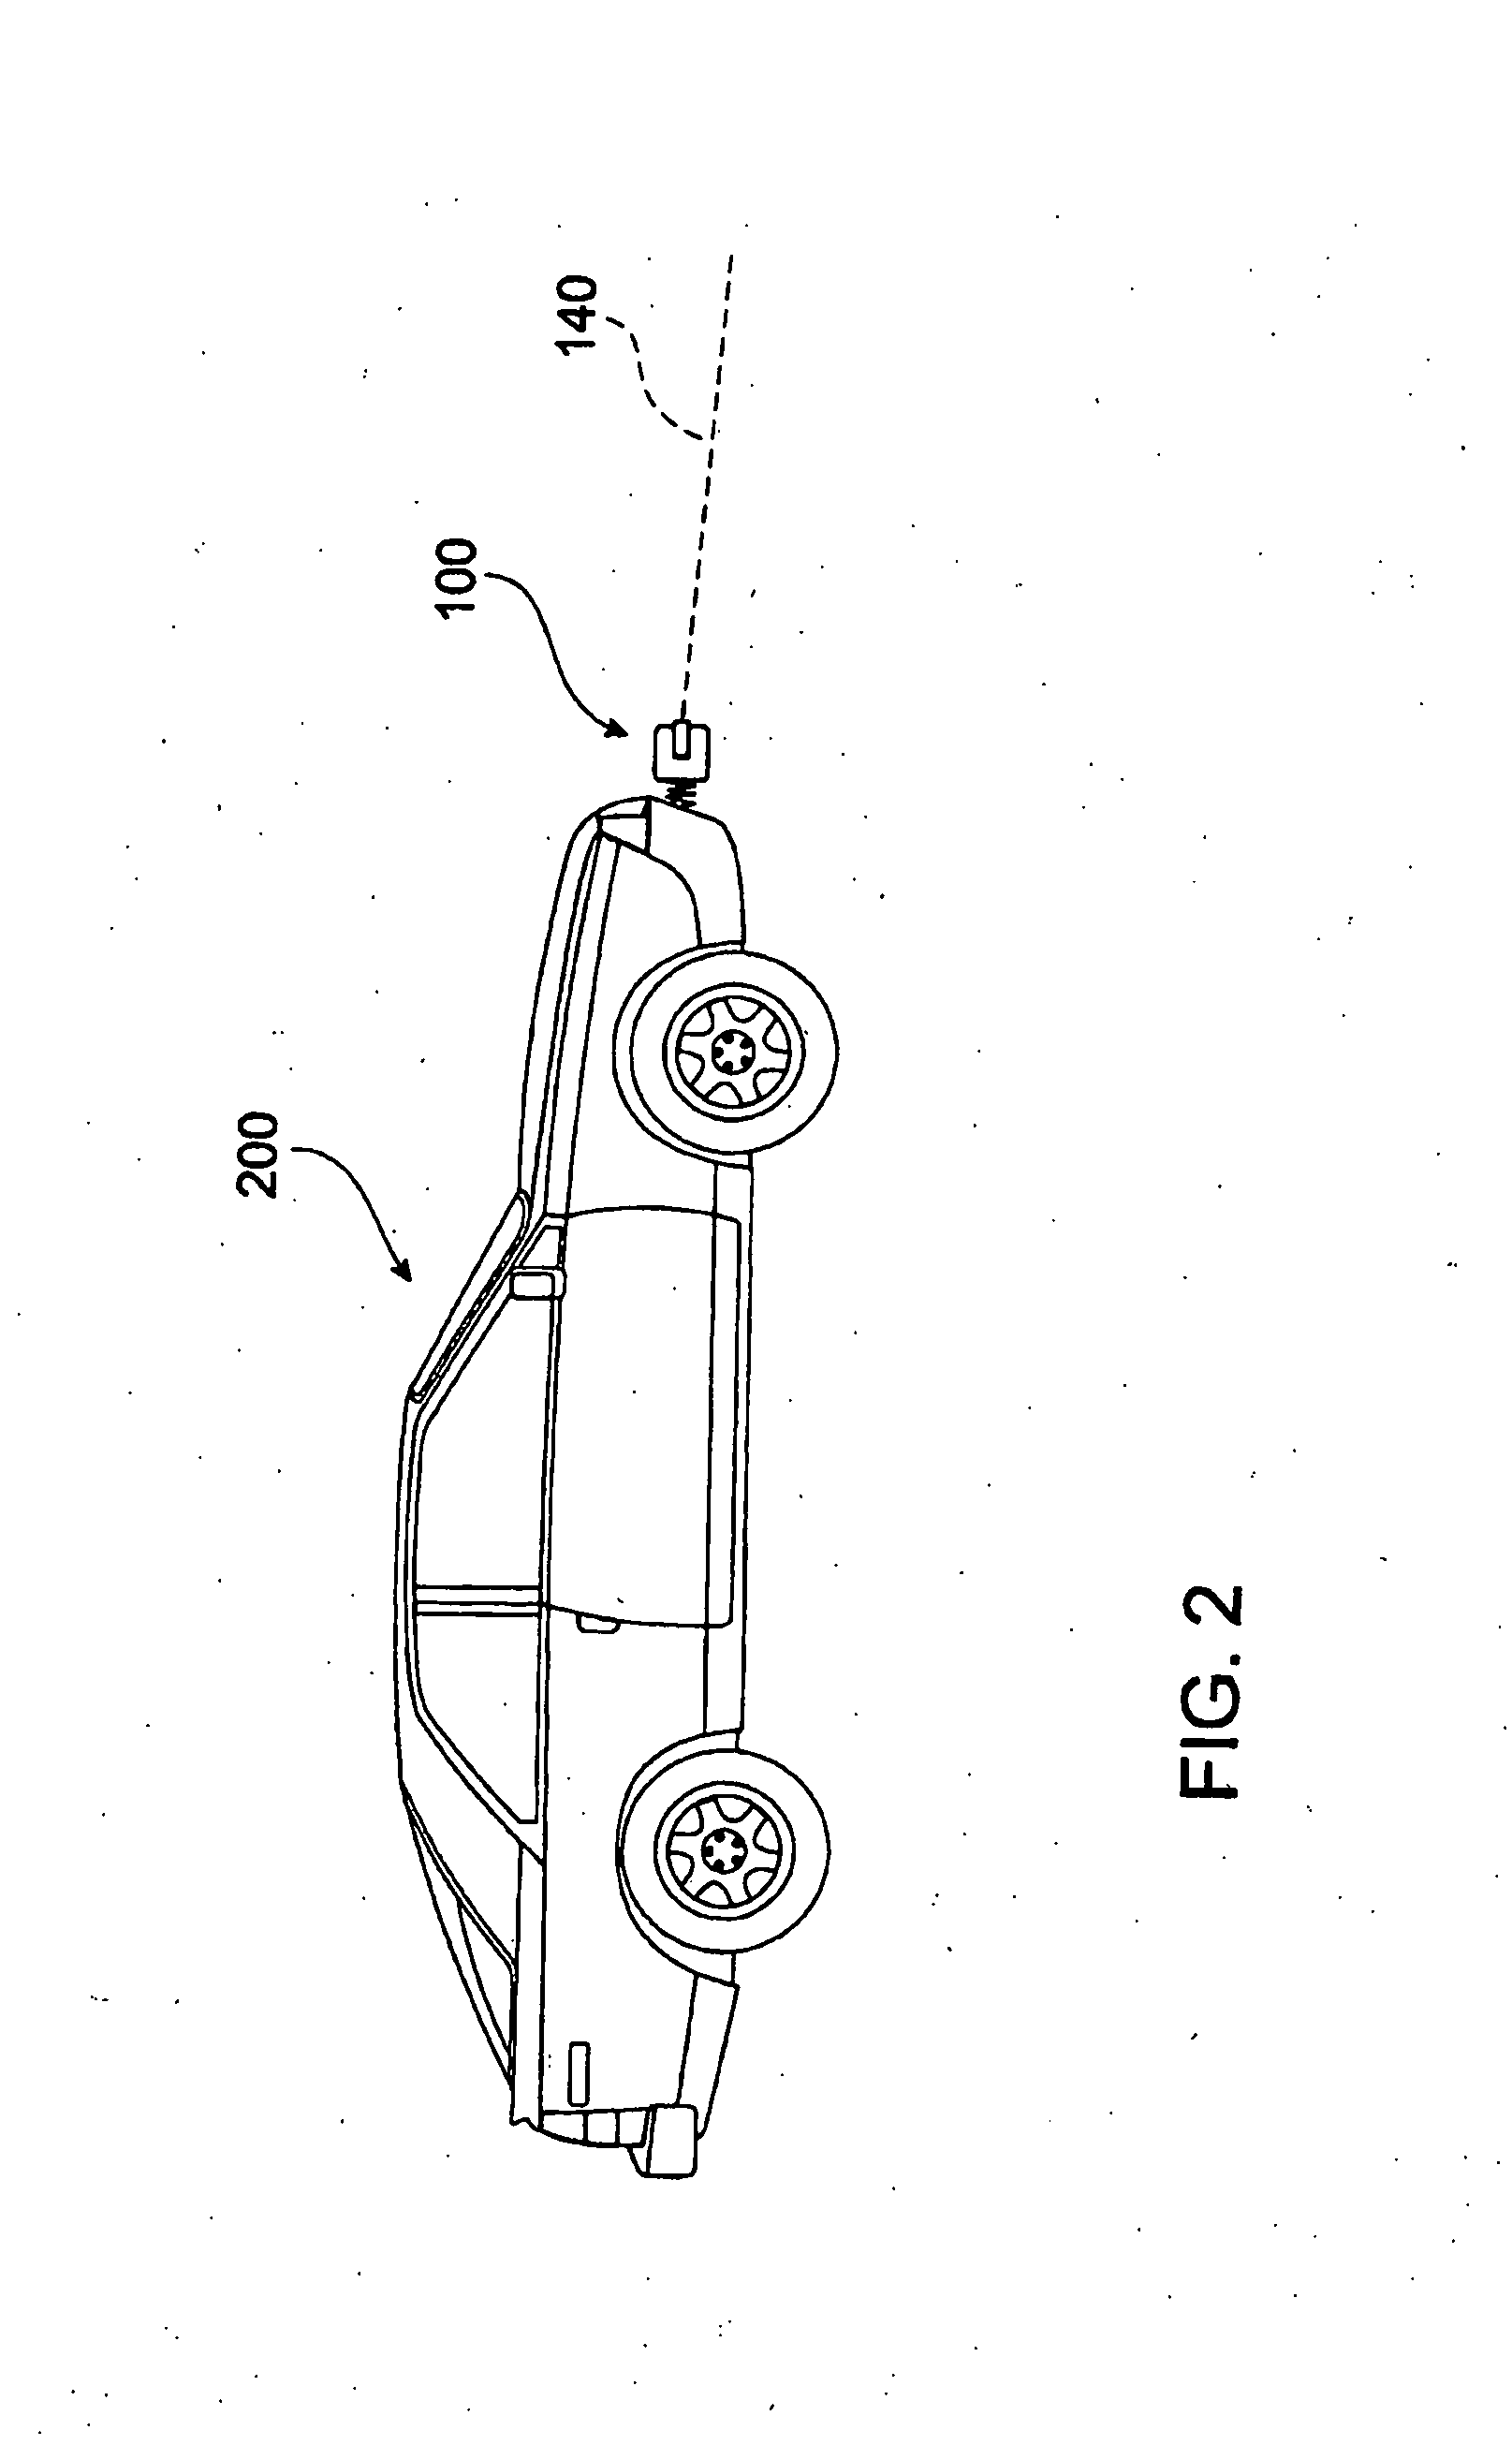 Three Dimensional Scanning Beam and Imaging System